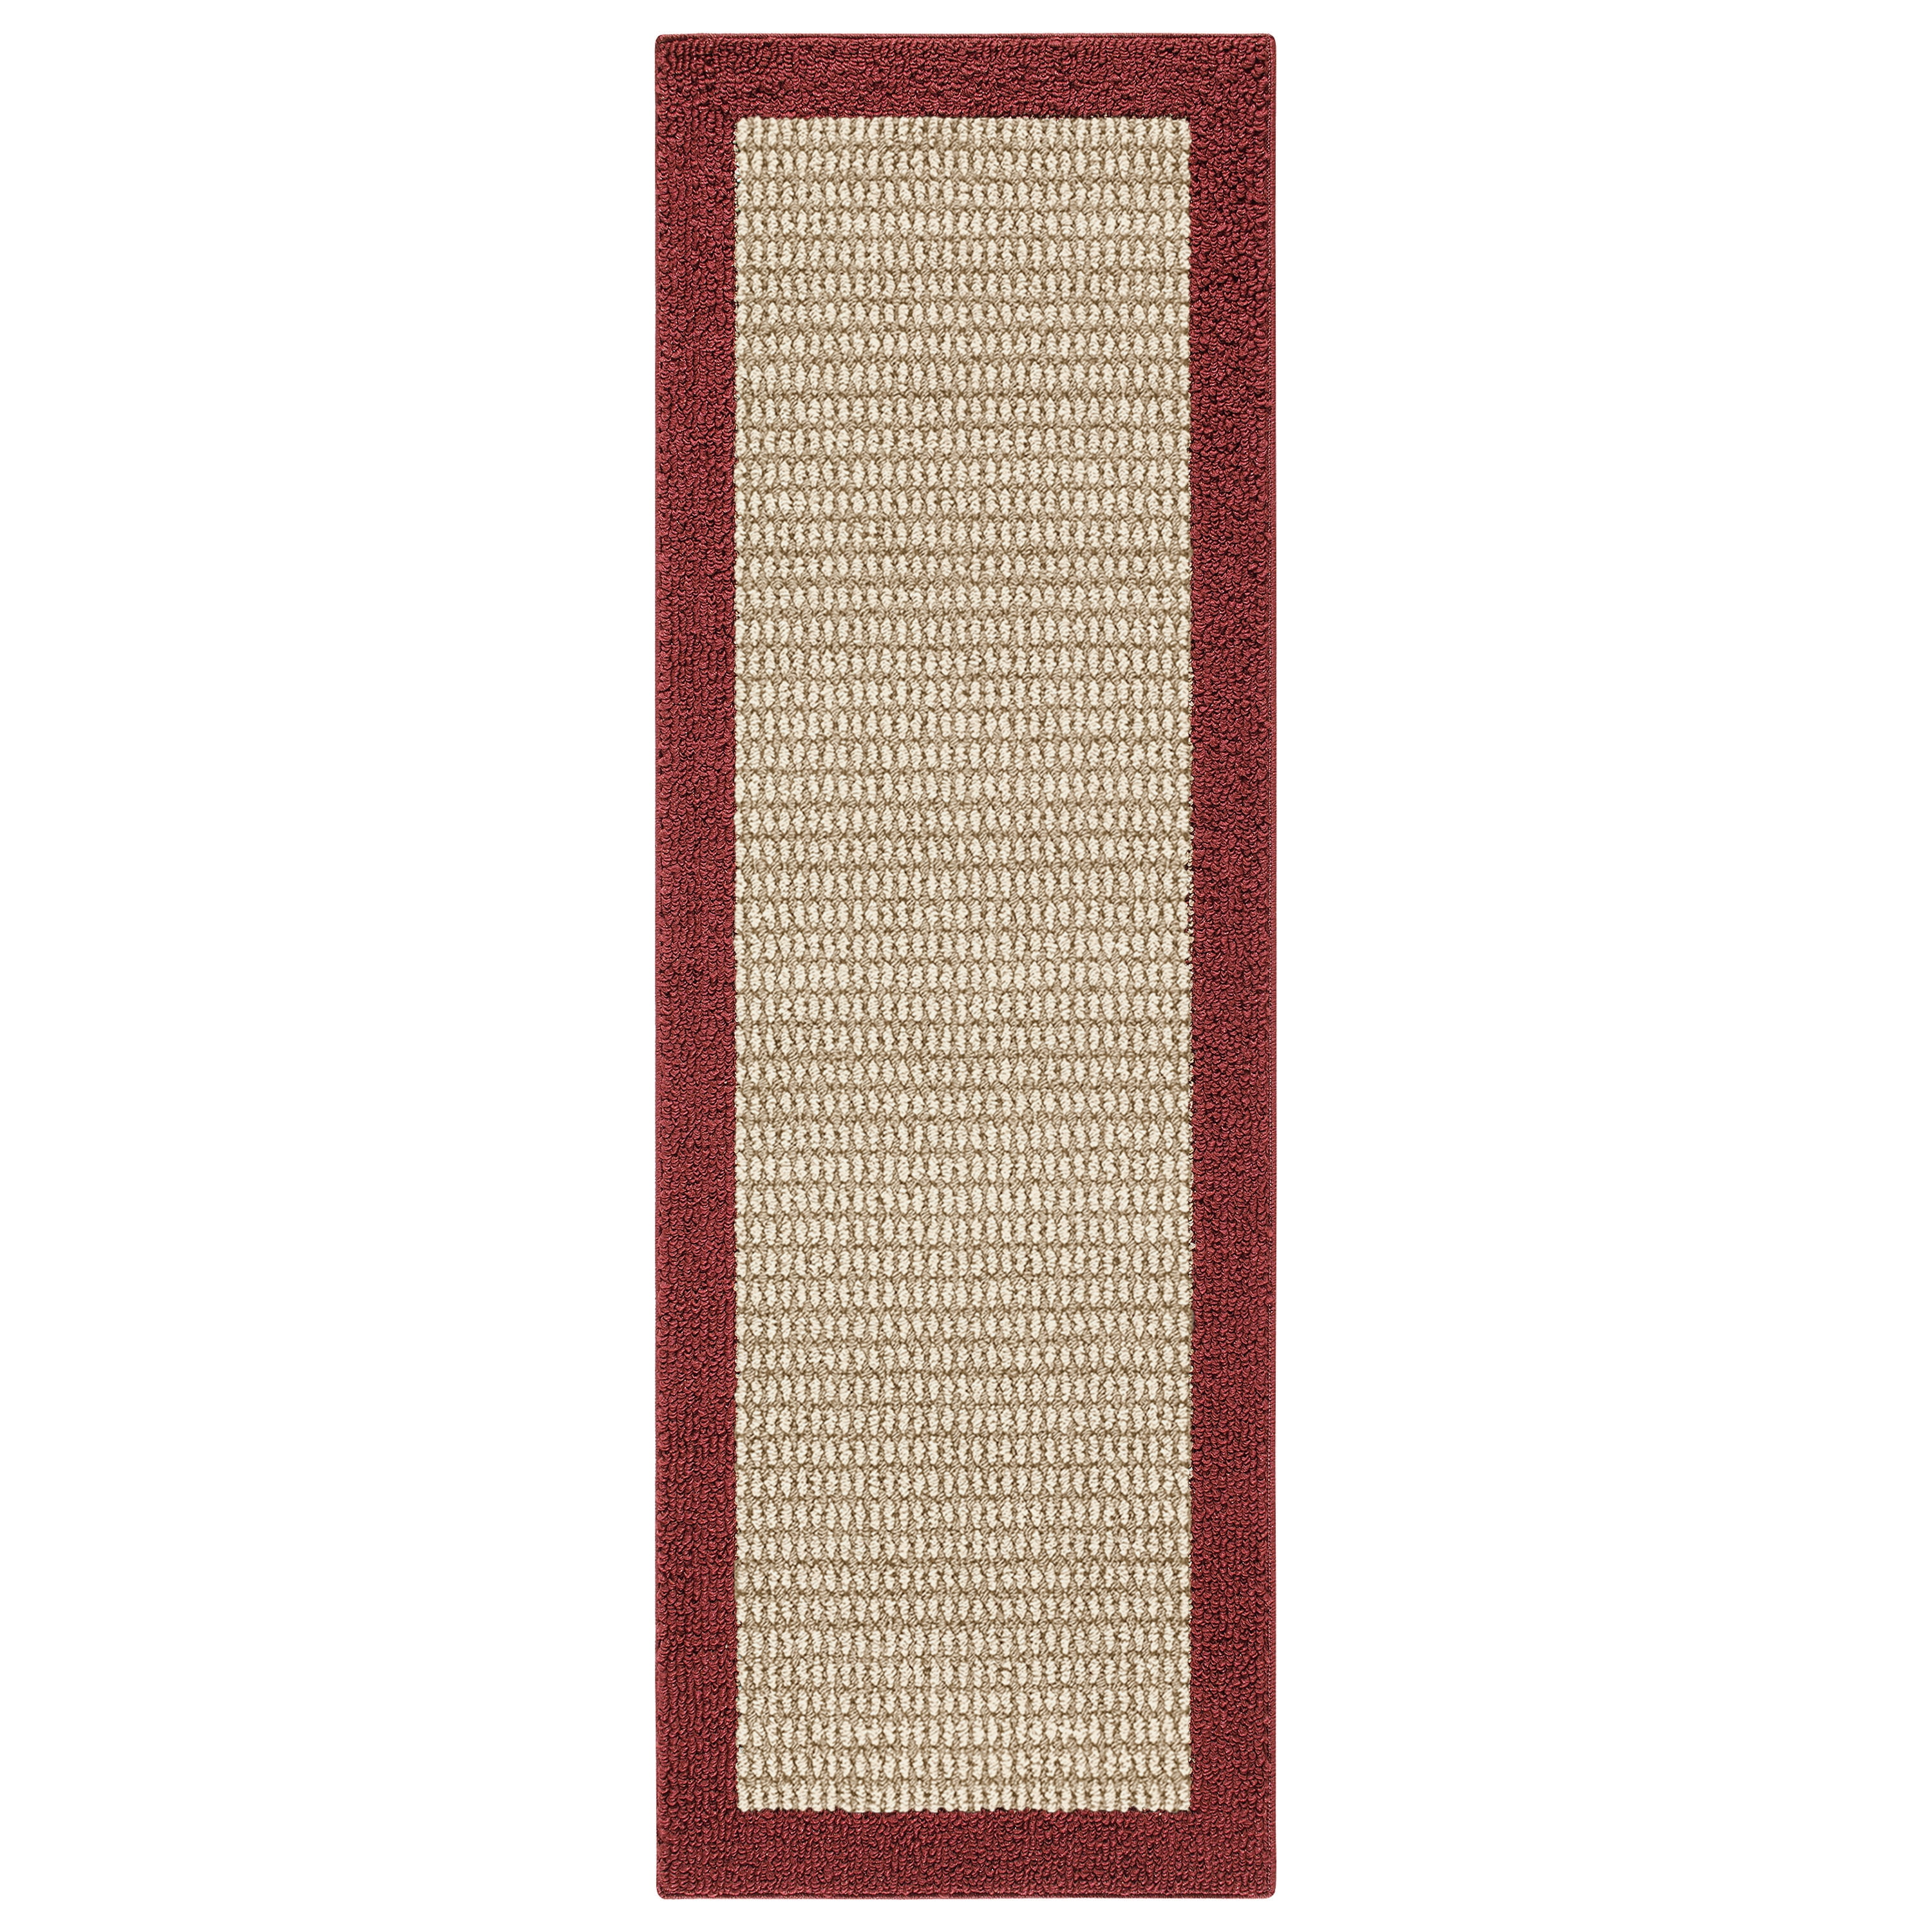 Mainstays Traditional Faux Sisal Border Red Runner Rug, 1'9"x5'